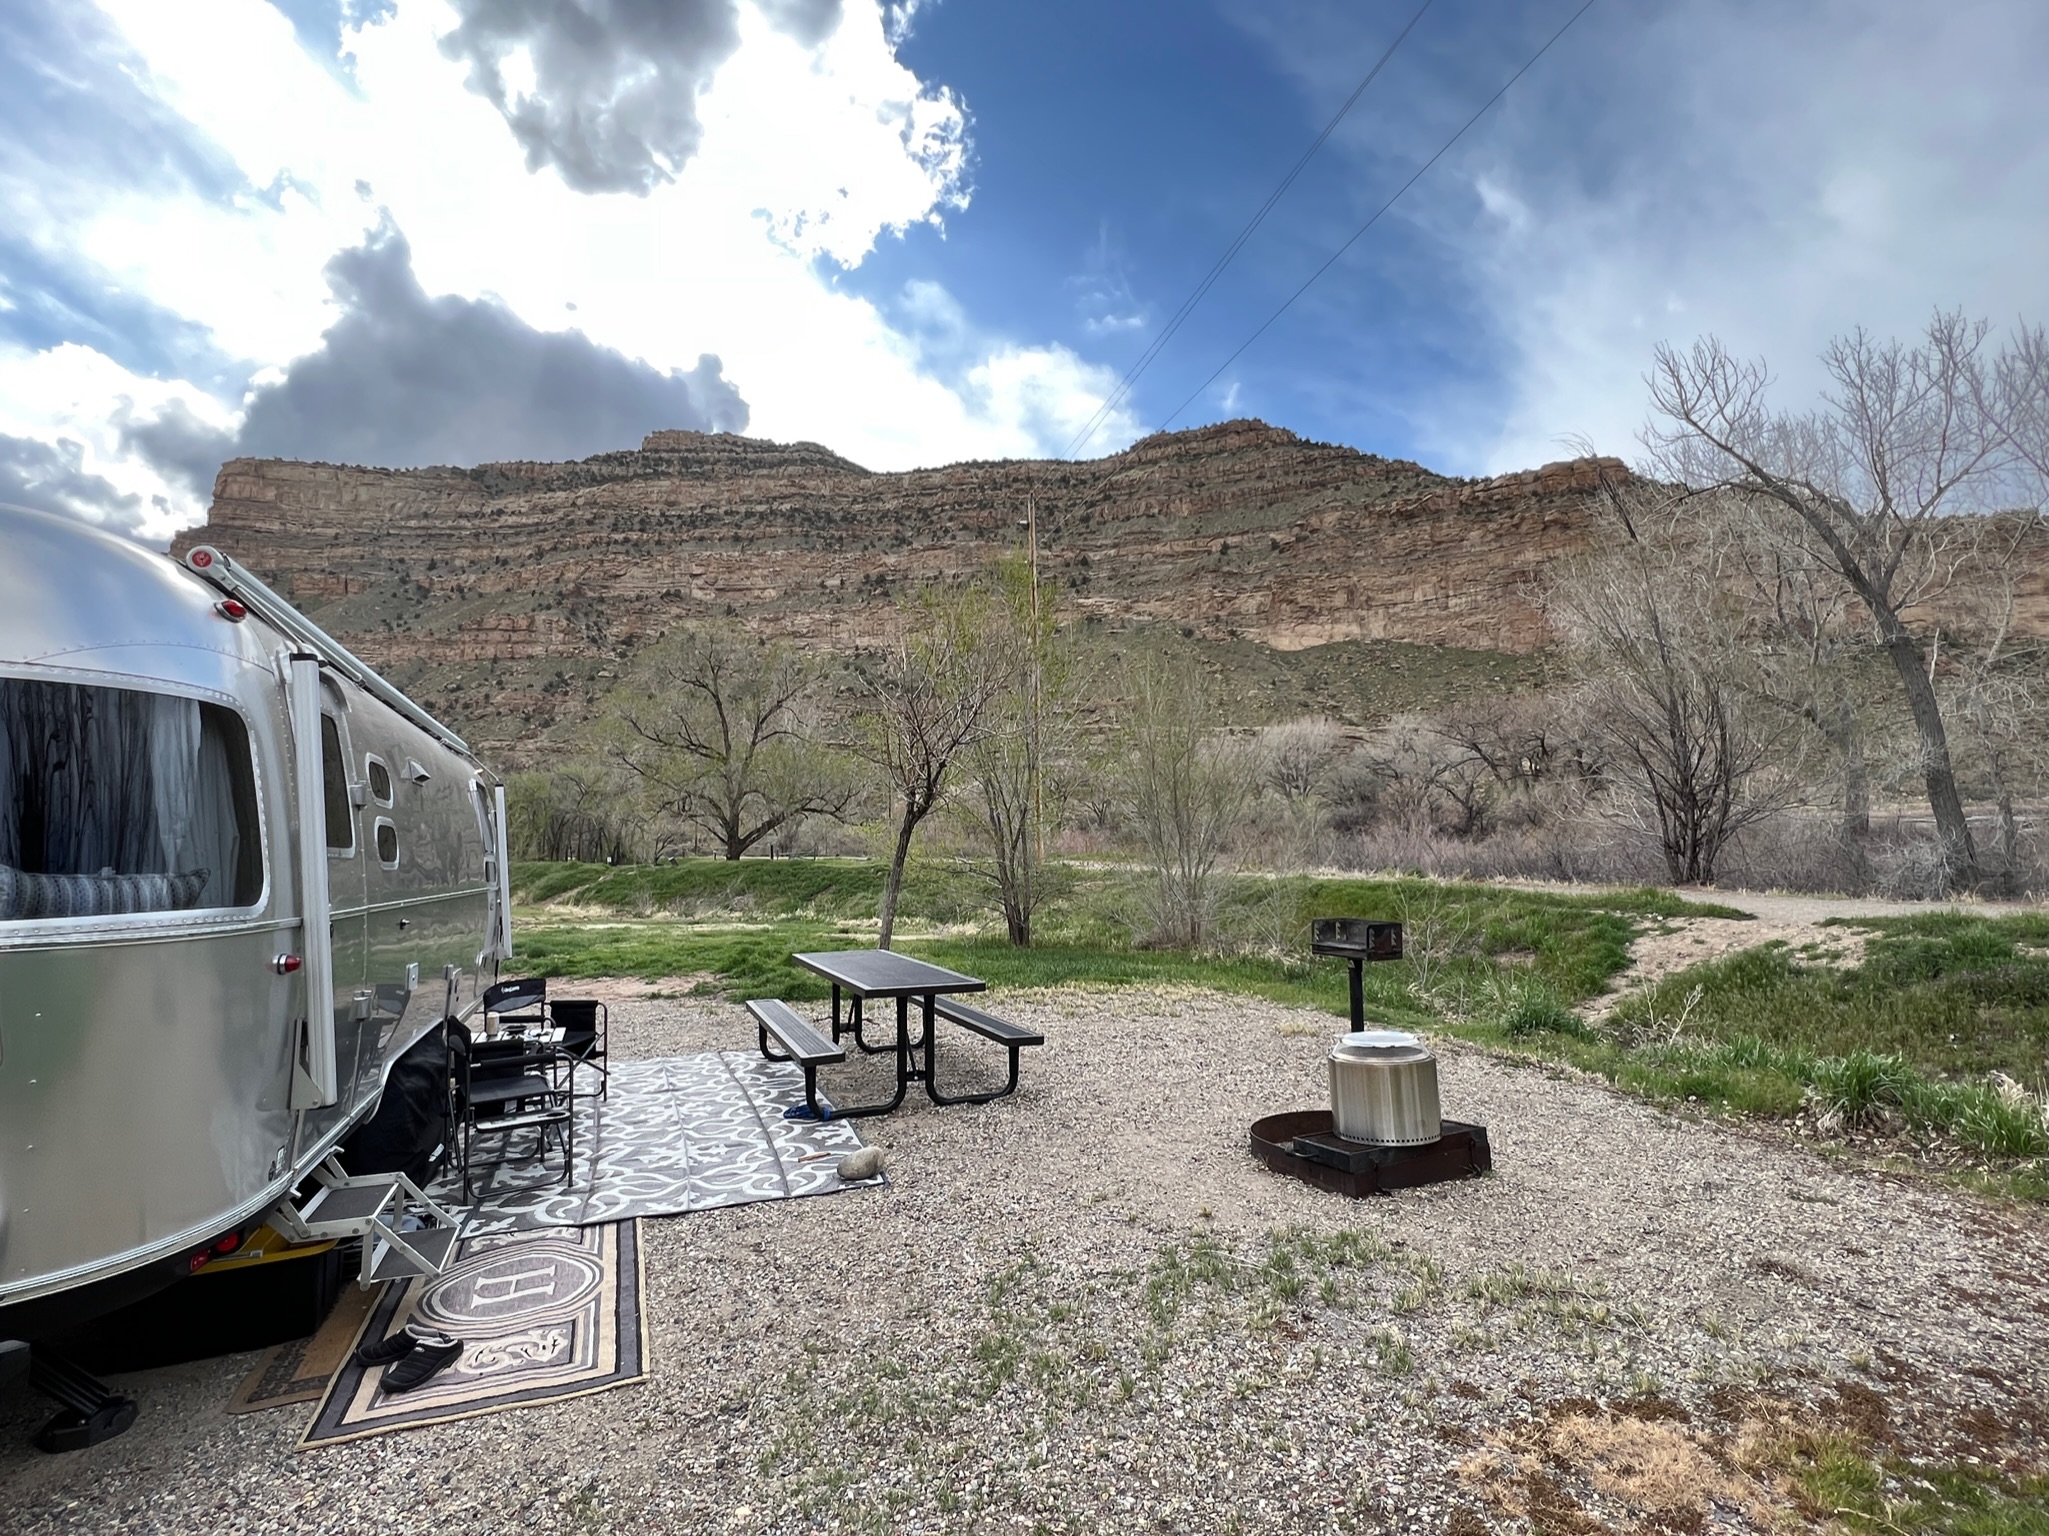 Palisade with airrstream